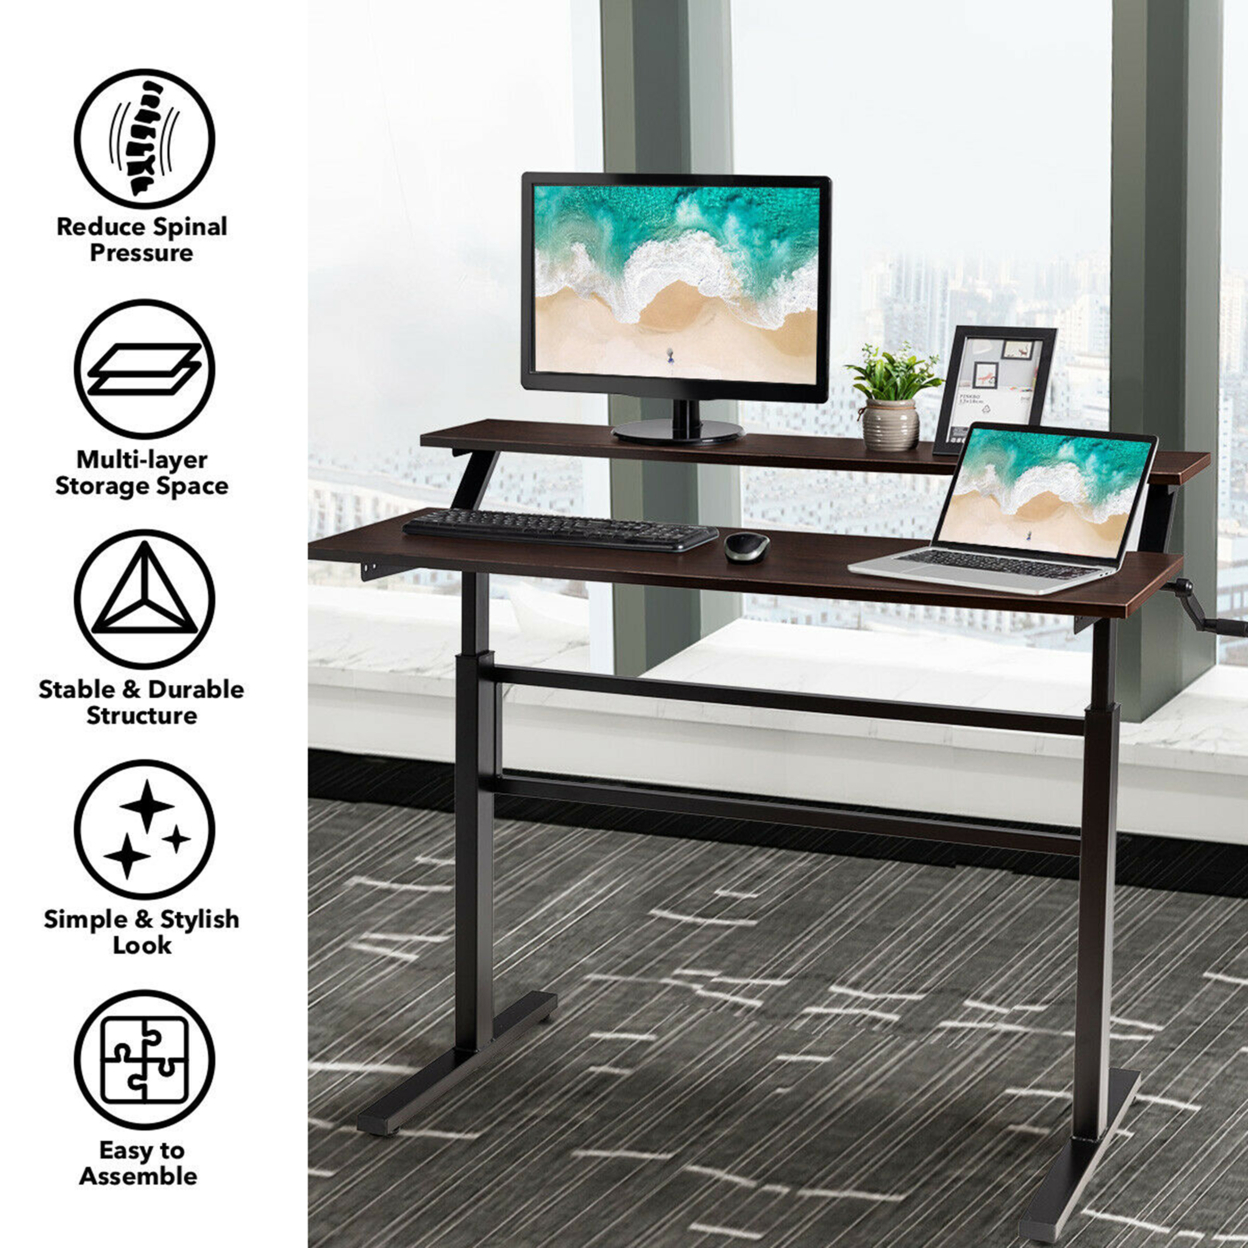 Standing Desk Crank Adjustable Sit To Stand Workstation With Monitor Shelf - Brown